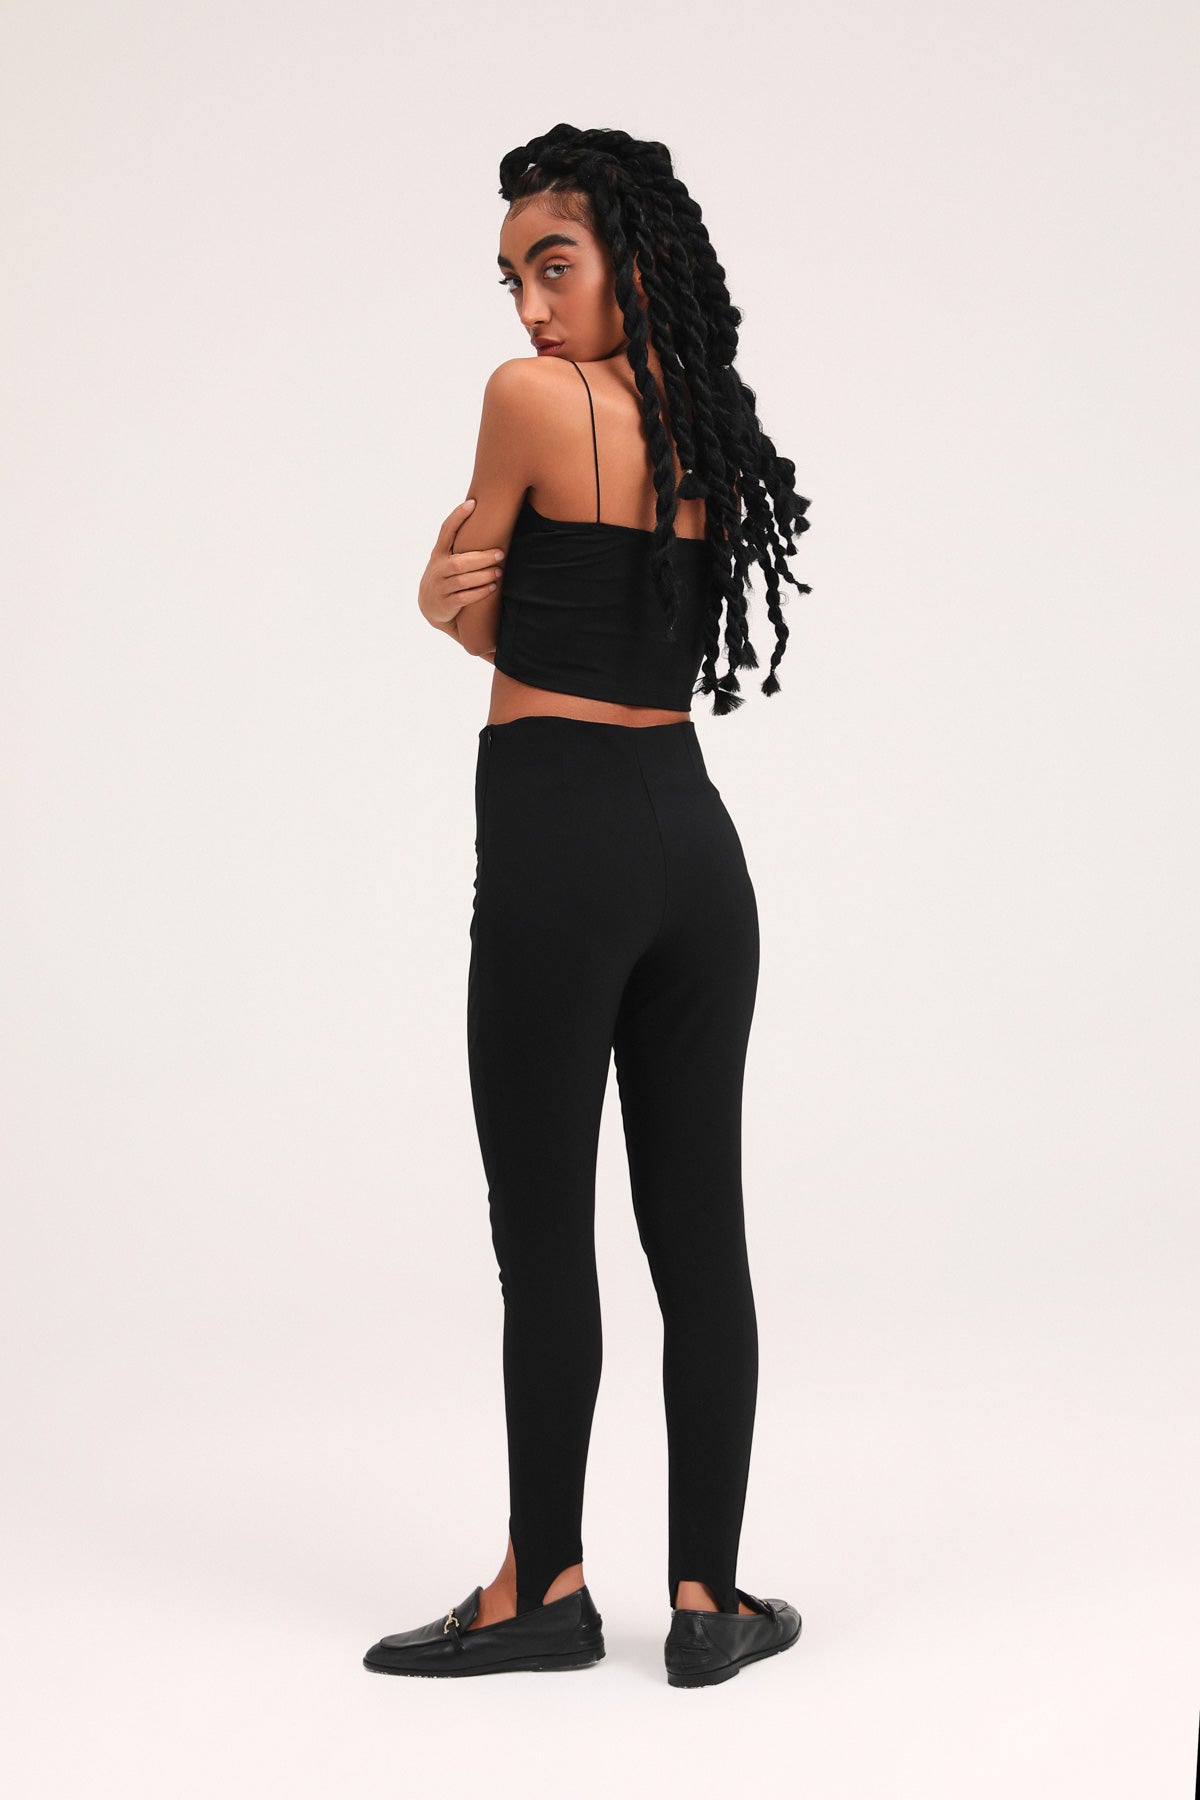 High Waist Leggings With Foot Band Black